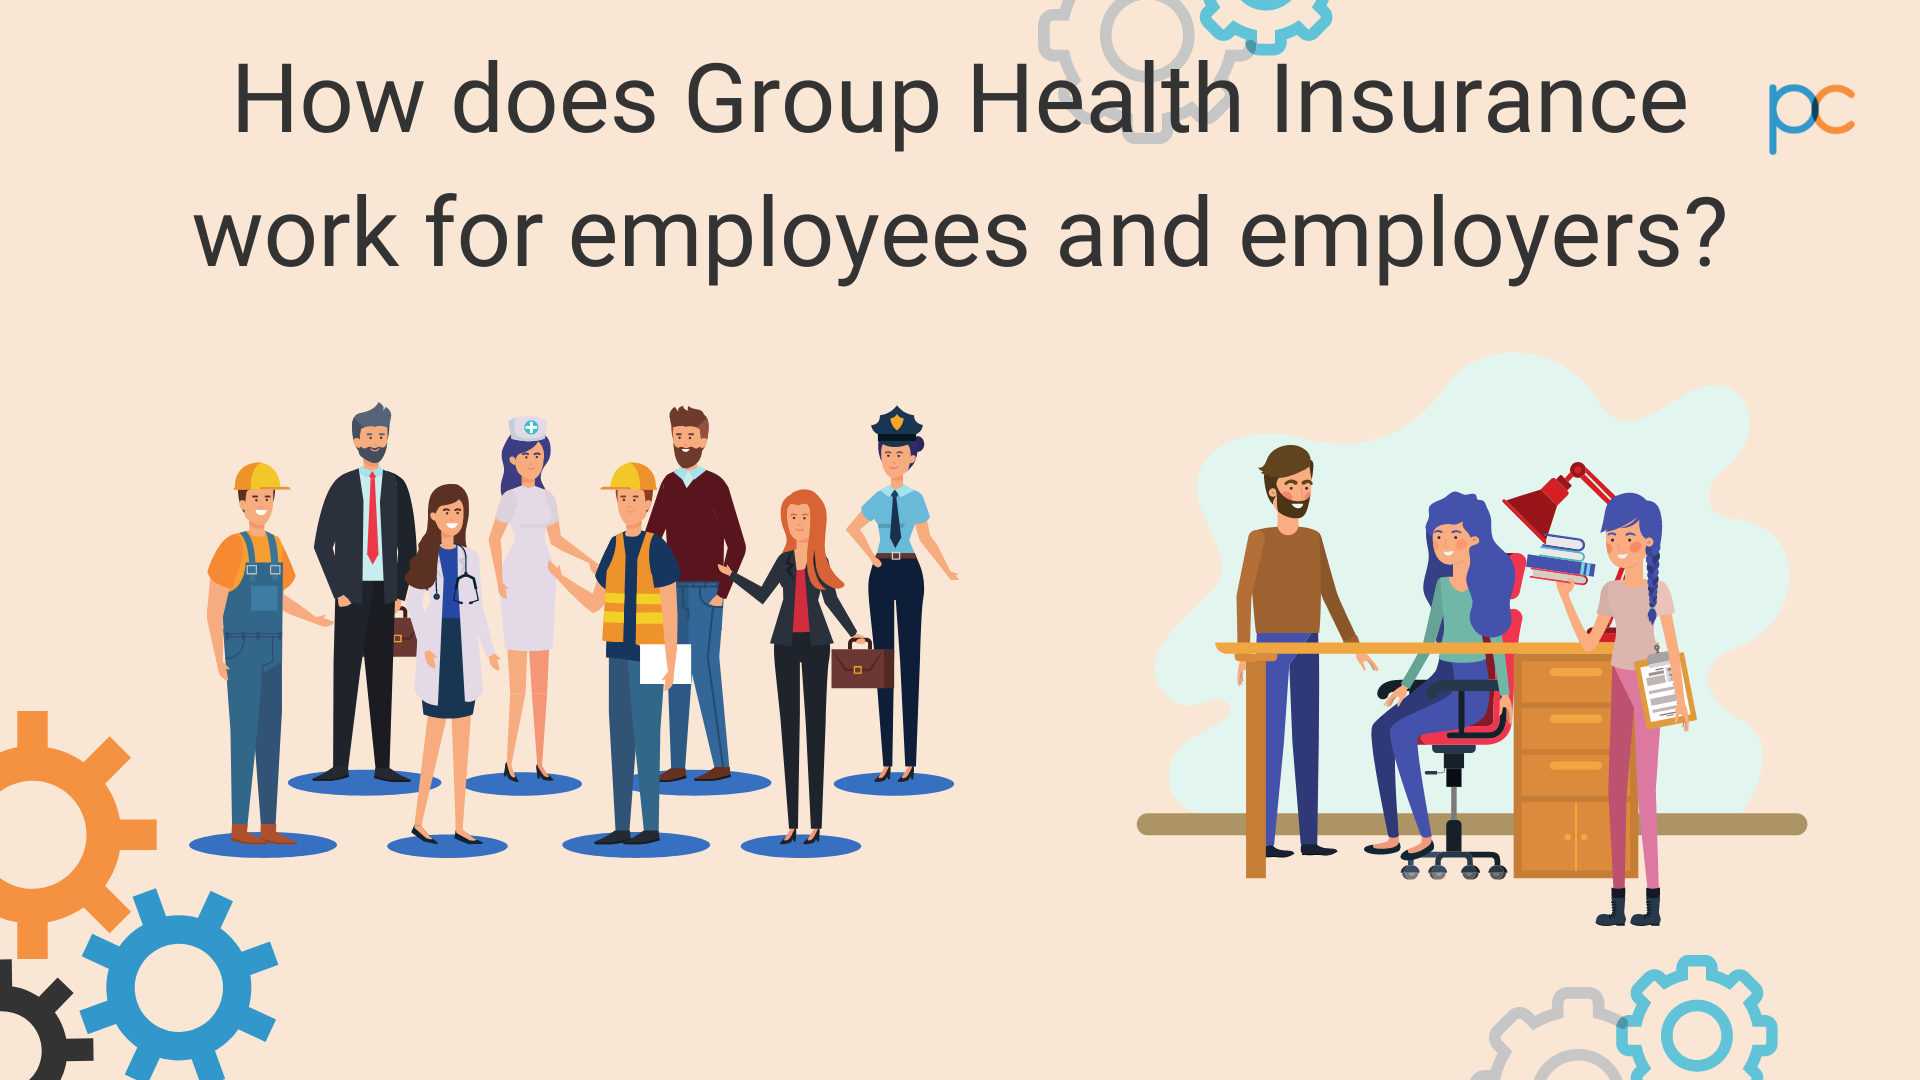 How Does Group Health Insurance Work For Employees and Employers